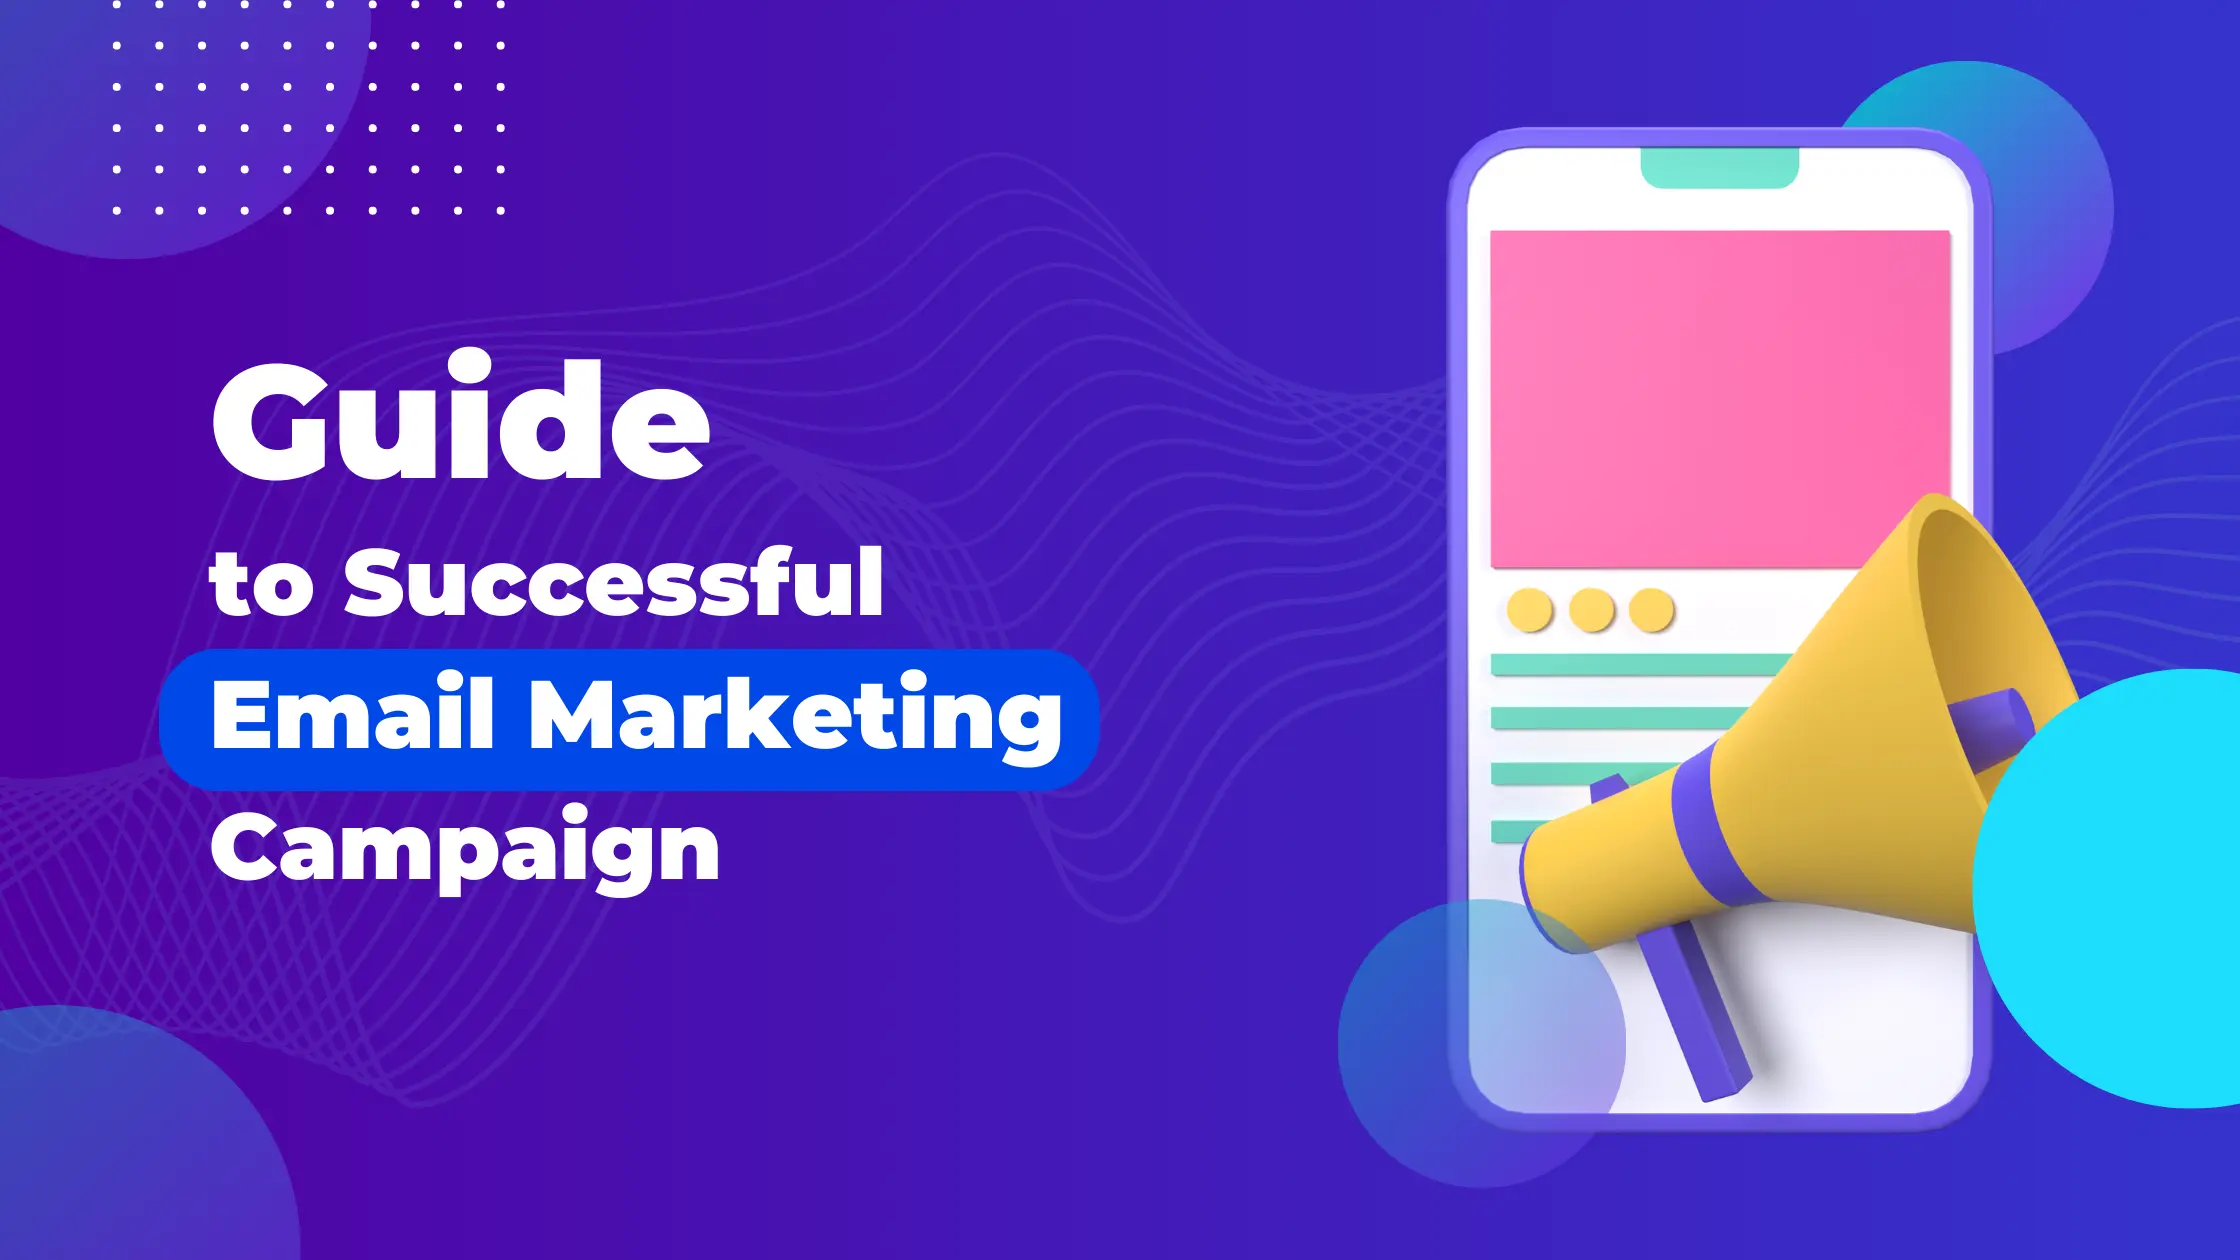 Guide to a Successful Email Marketing Campaign